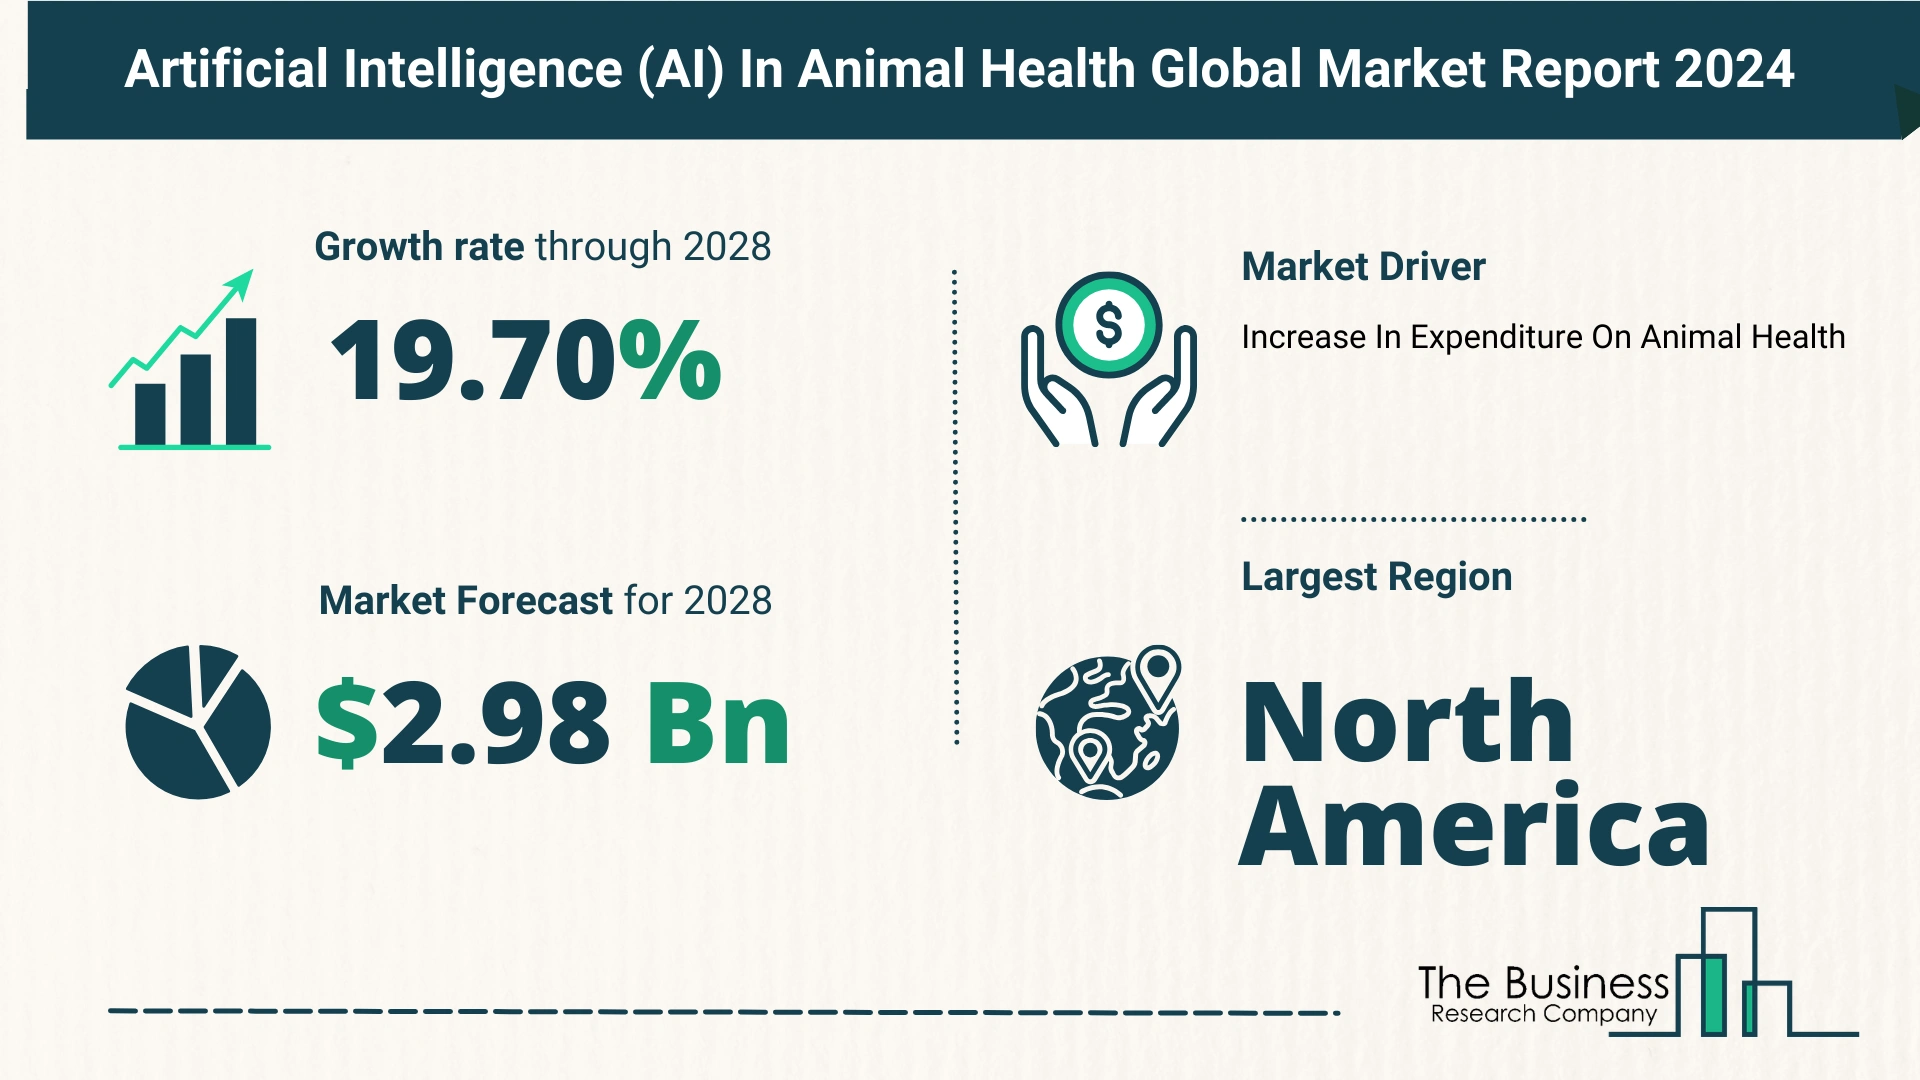 Key Trends And Drivers In The Artificial Intelligence (AI) In Animal Health Market 2024